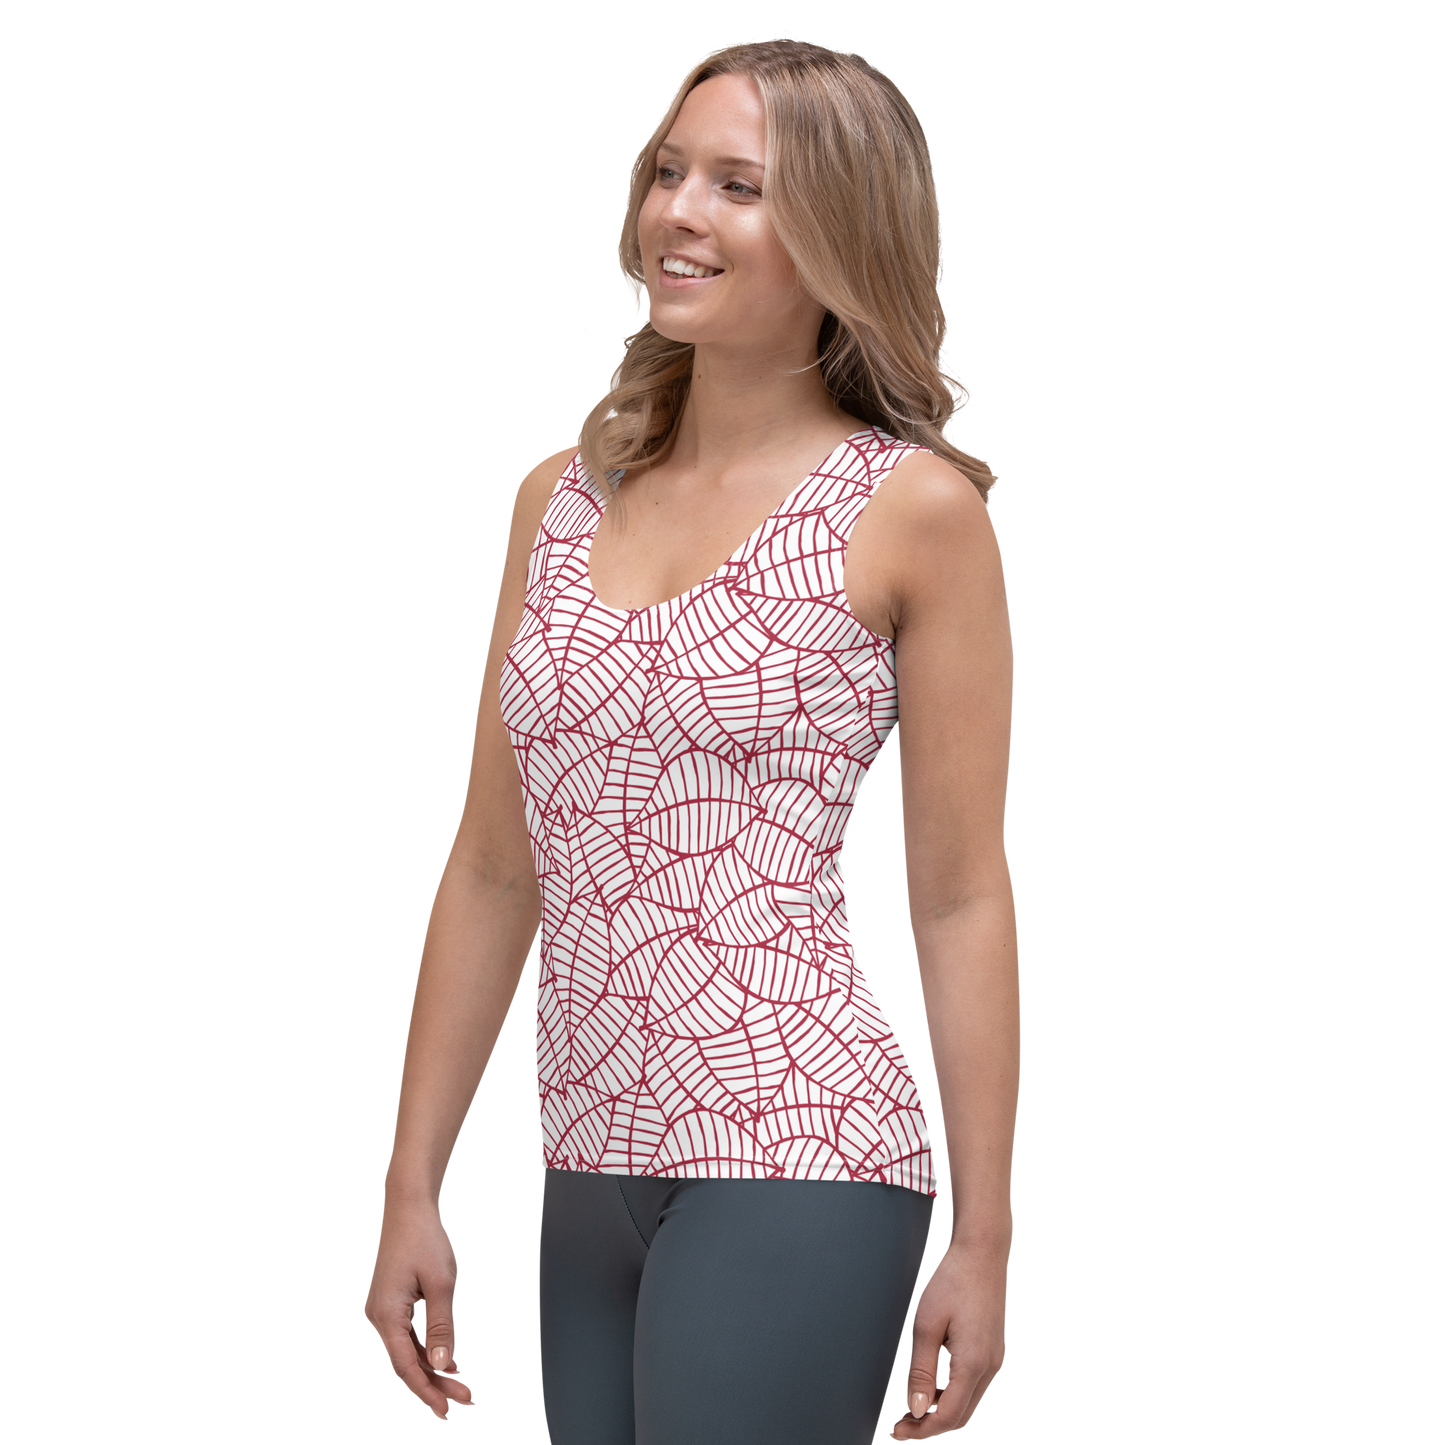 Colorful Fall Leaves | Seamless Patterns | All-Over Print Women's Tank Top - #8